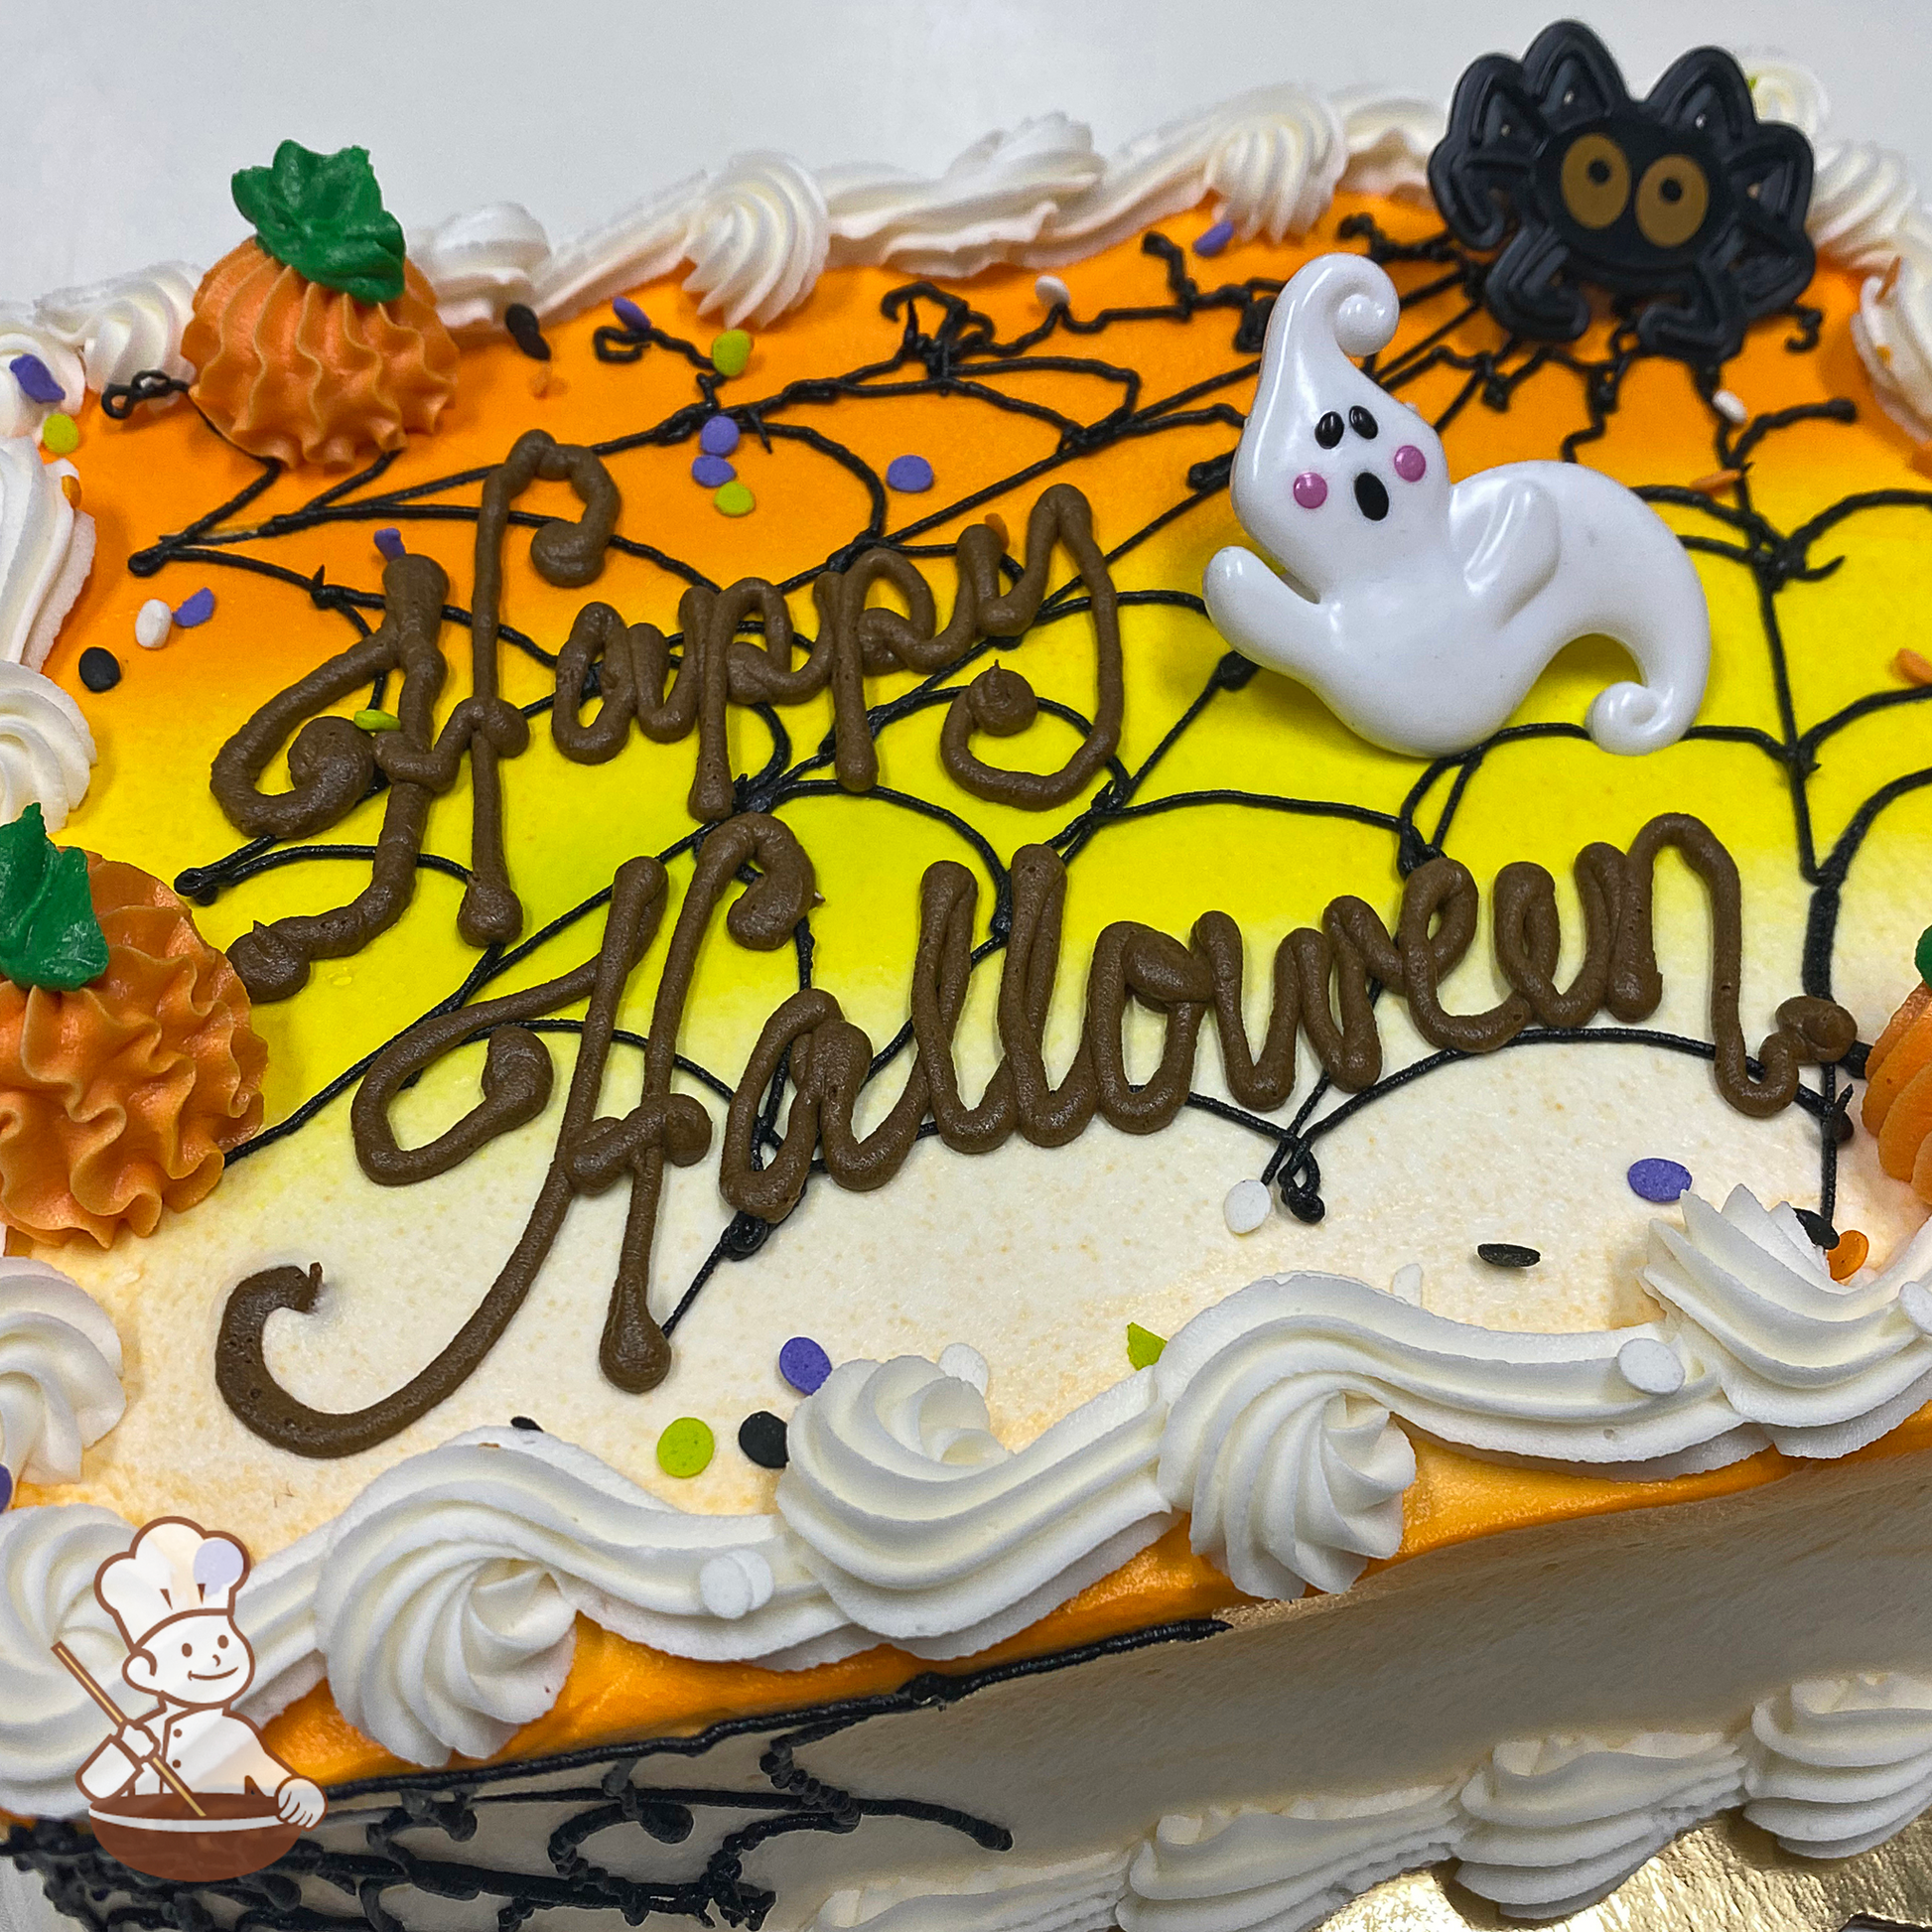 Halloween sheet cake with spider web and pumpkins on orange, yellow and white candy corn scene; with ghost and spider toys.